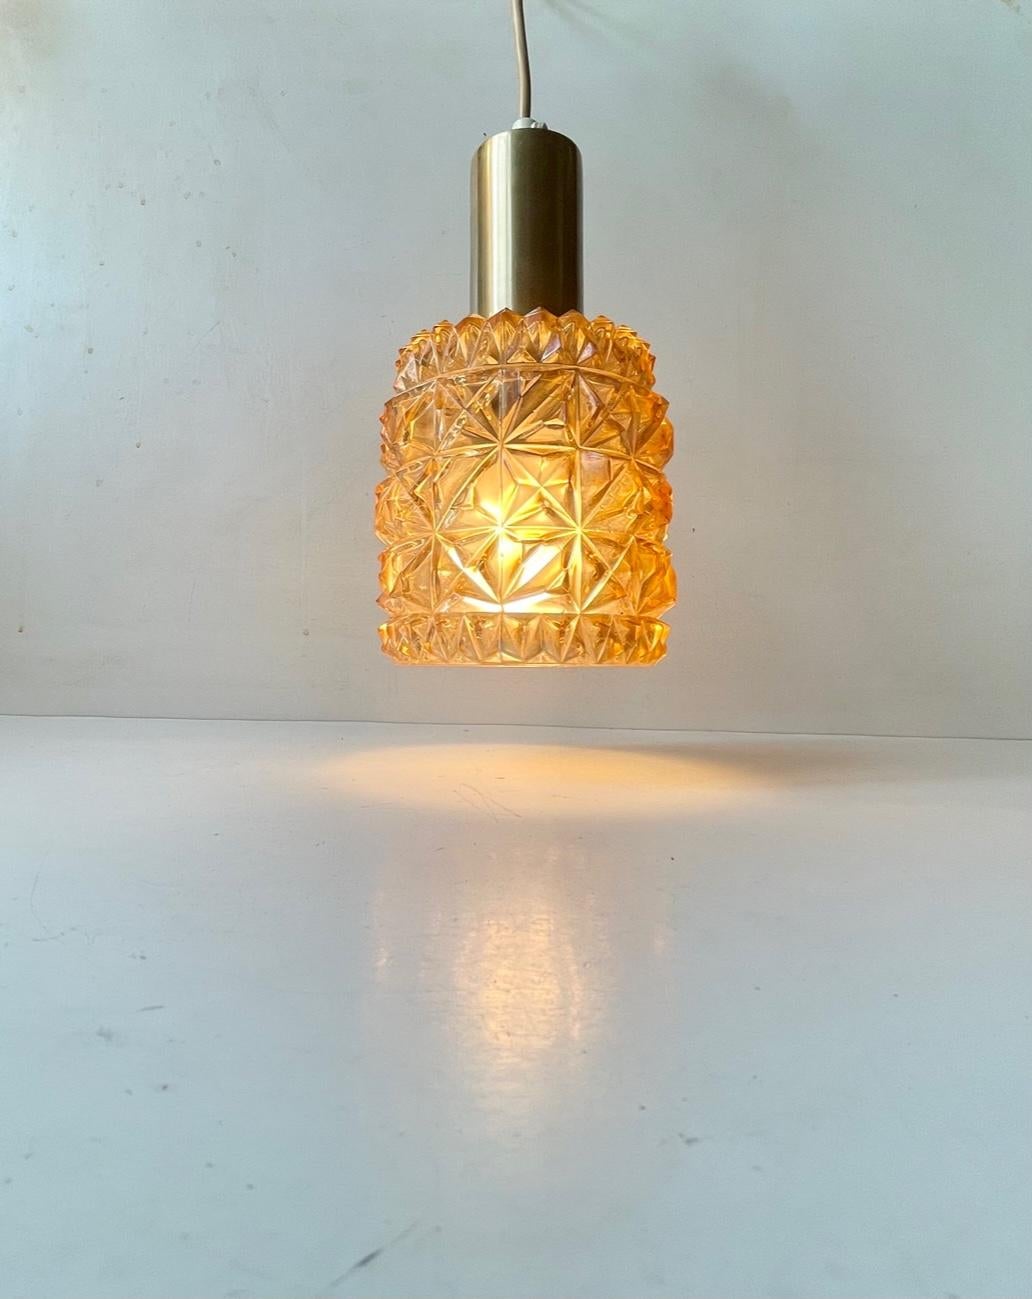 Small Scandinavian hanging light composed of pressed honey glass in diamond pattern glass and a top in brass-alloy aluminium. Unknown Scandinavian maker/design in a style reminiscent of Orrefors and Carl Fagerlund. It is fitted with a E27 light